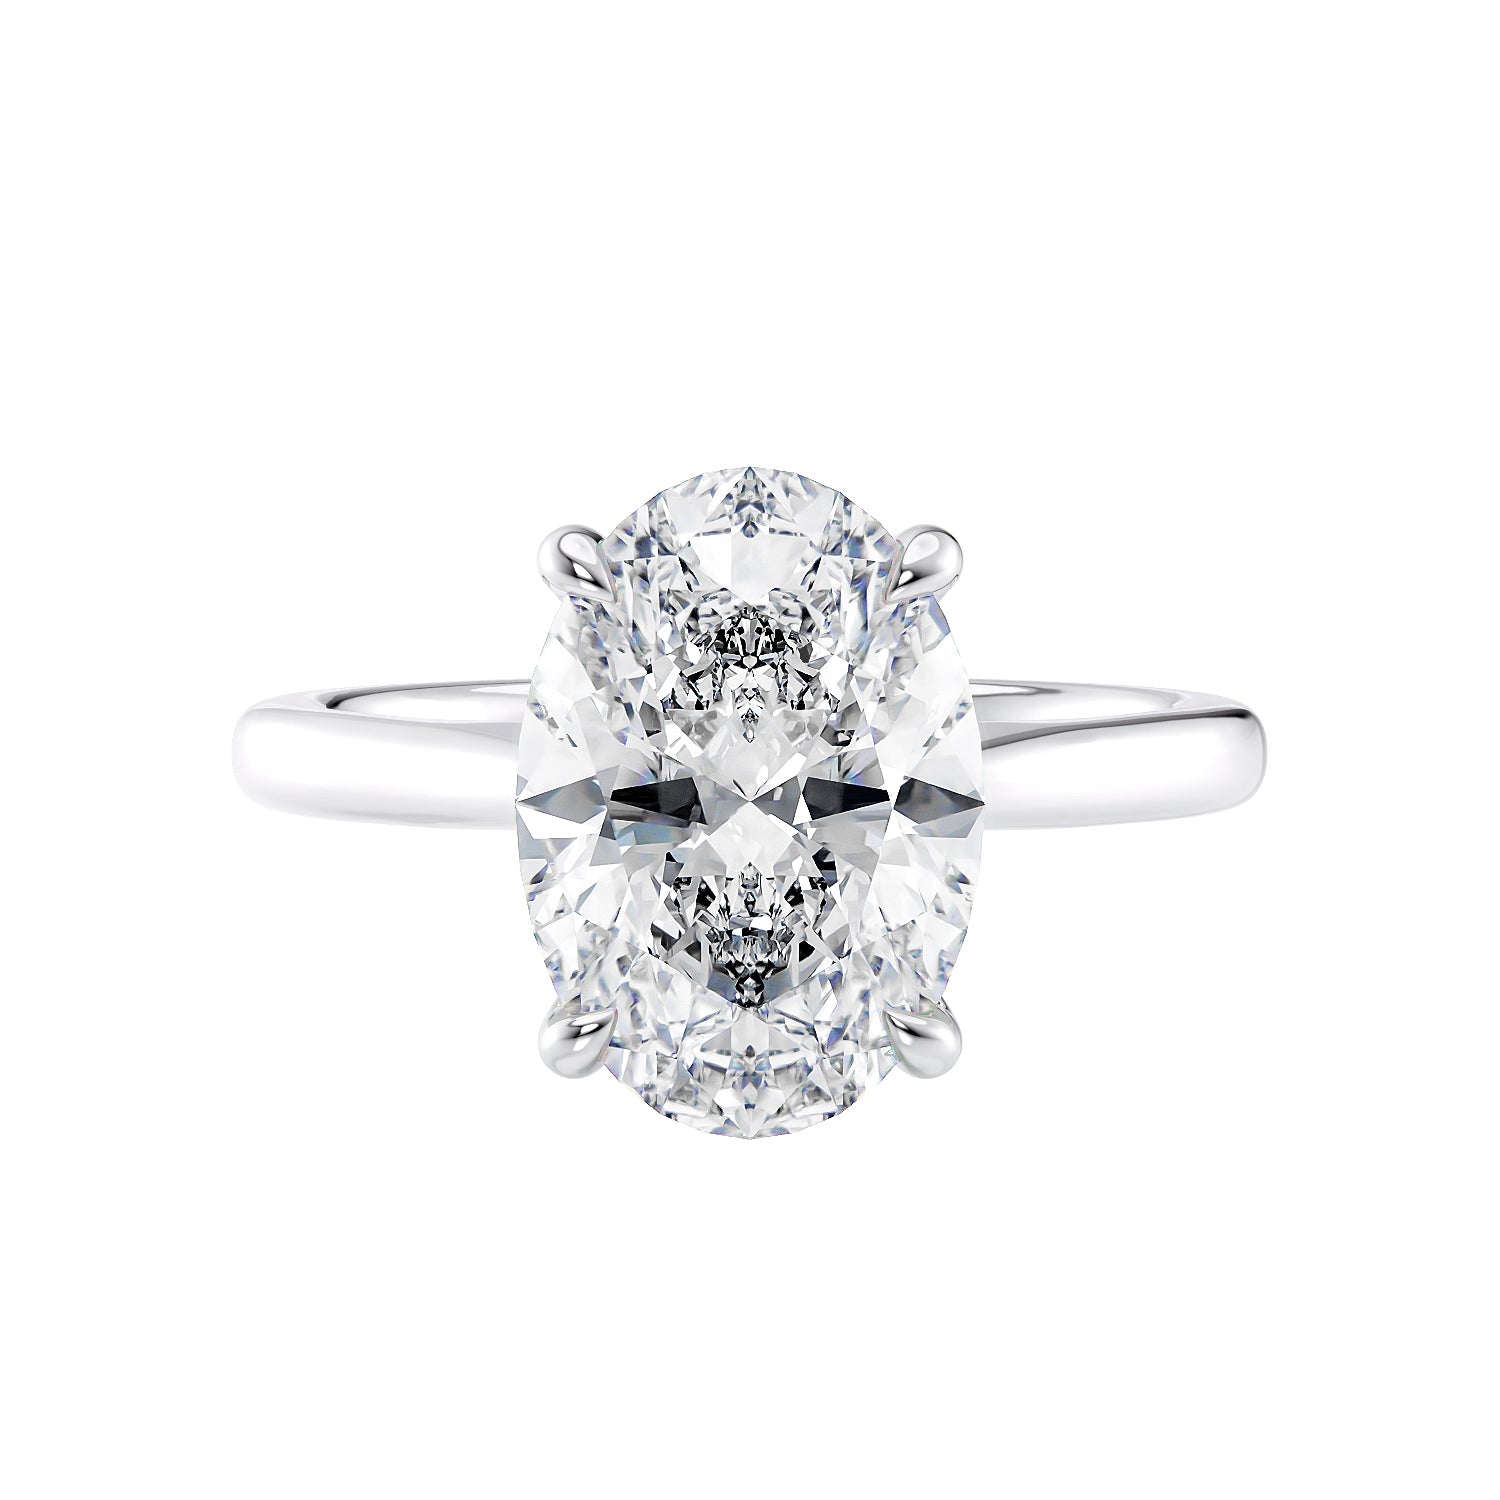 Hidden halo oval solitaire engagement ring white gold front view.